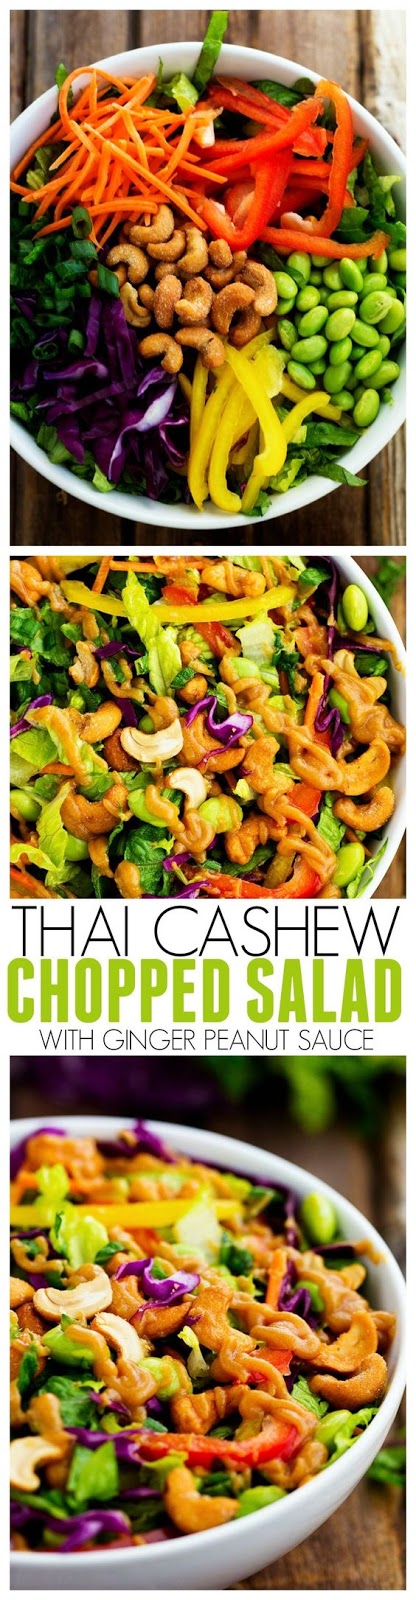 THAI CASHEW CHOPPED SALAD WITH A GINGER PEANUT SAUCE